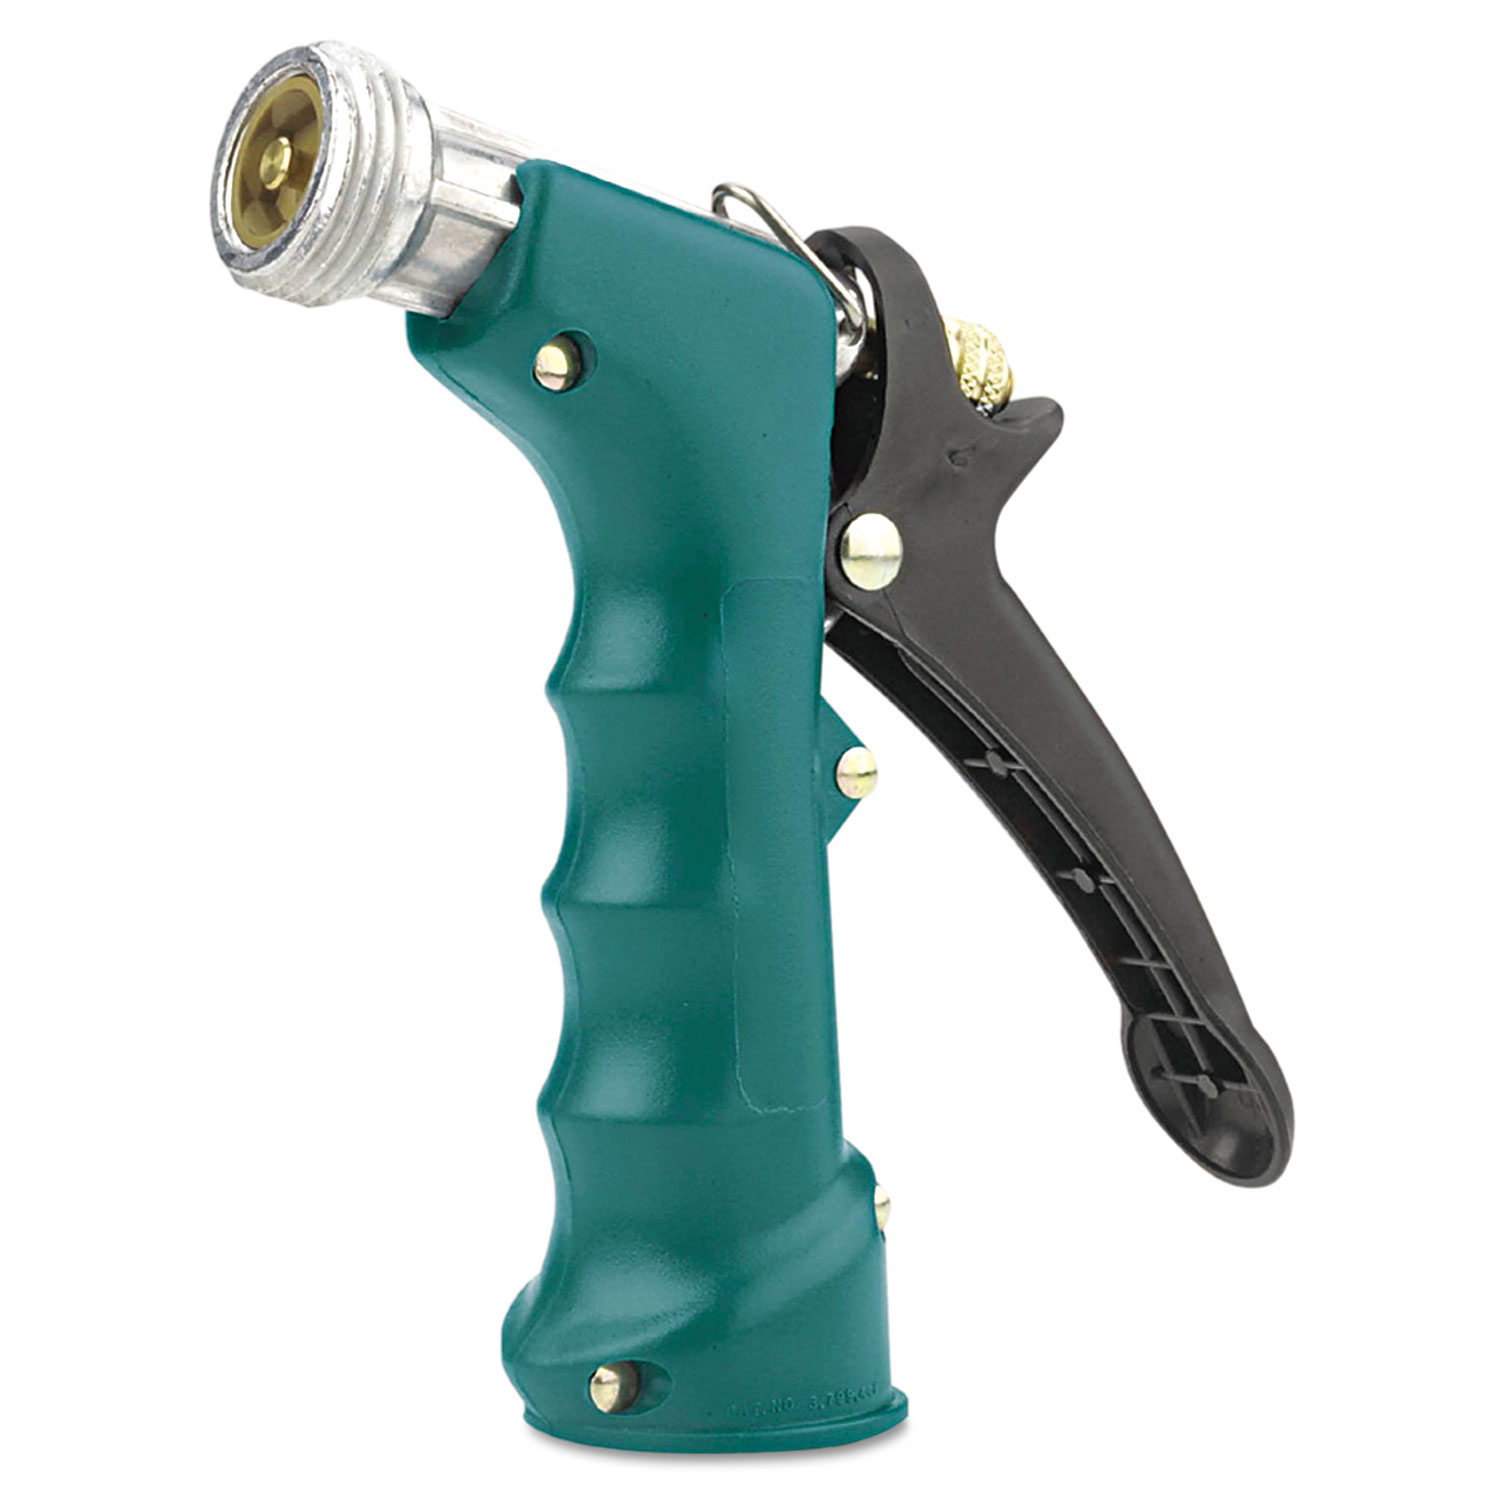  Gilmour 857102-1001 Insulated Grip Nozzle, Pistol-Grip, Zinc/Brass/Rubber, Green (GLM571TFR) 